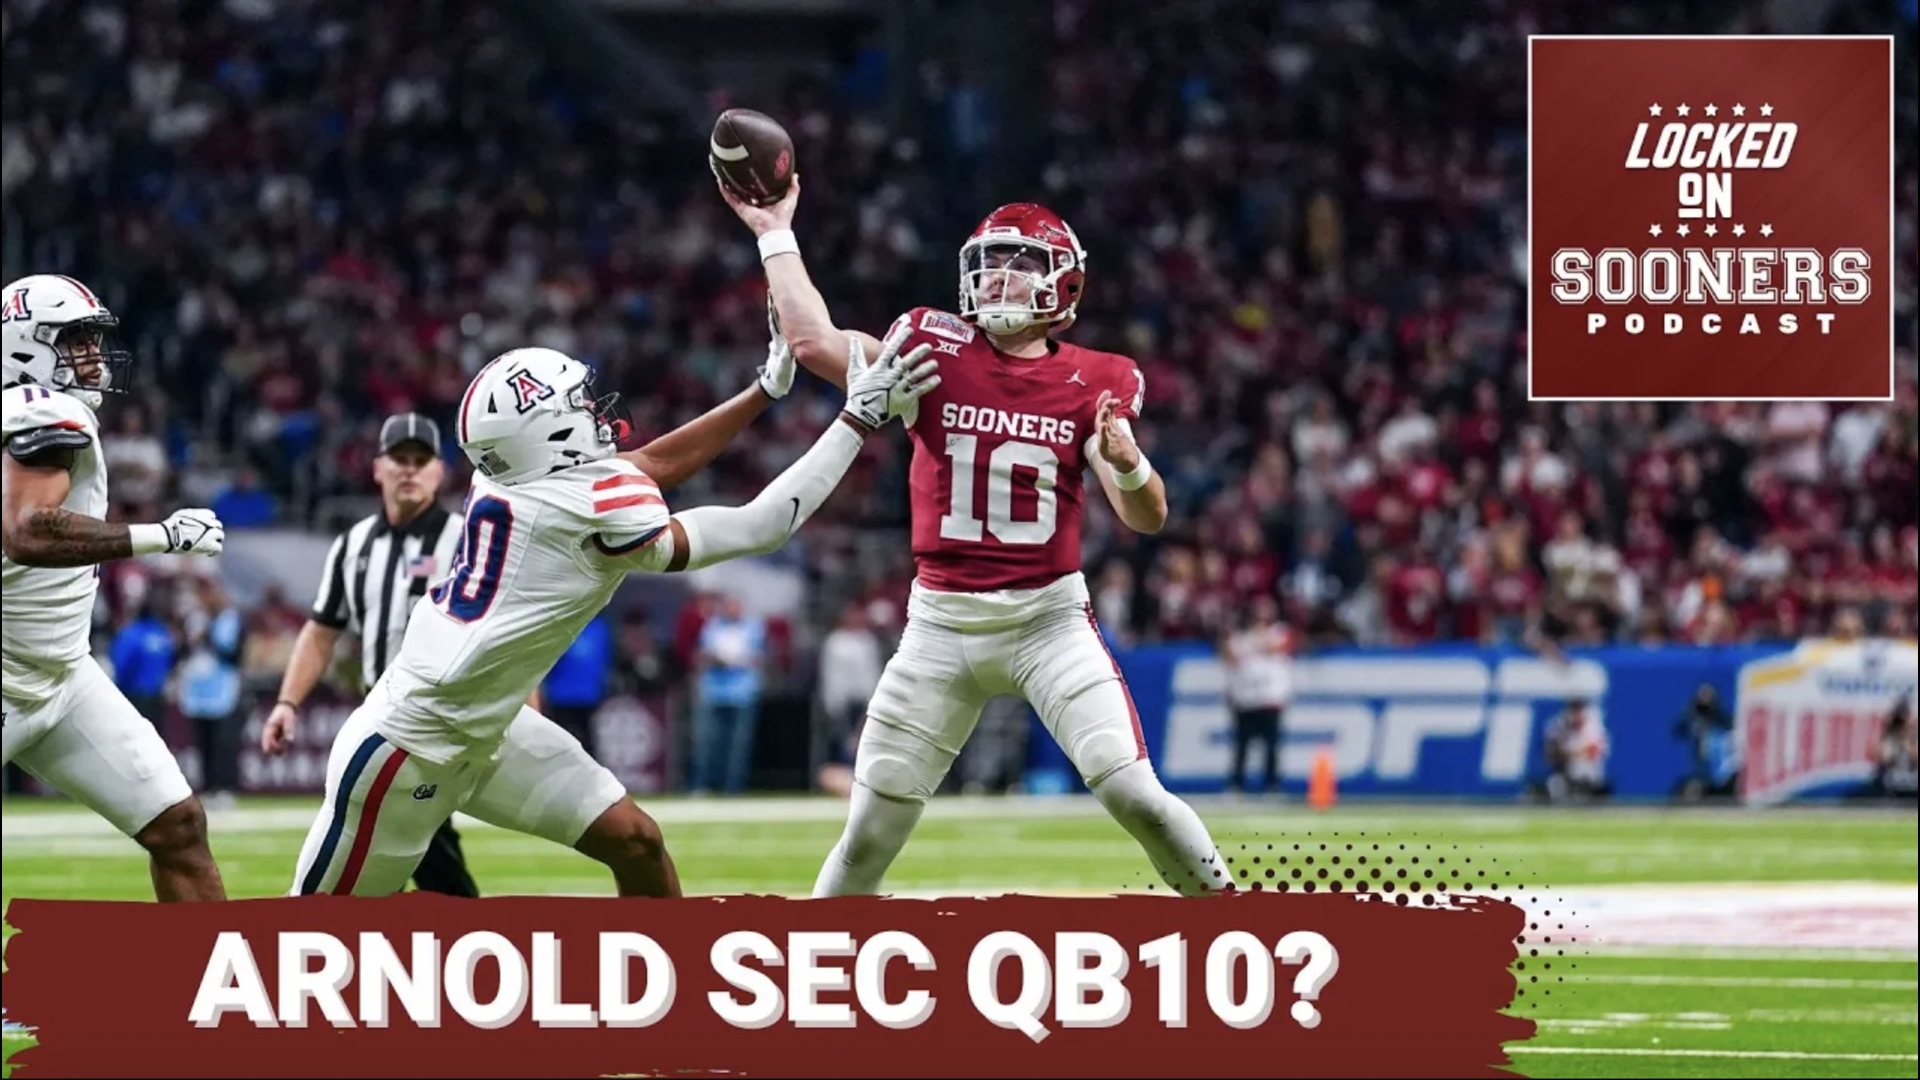 Jackson Arnold comes in at No. 10 in the SEC QB Rankings from  @ThatSECPodcast . Does it make sense?